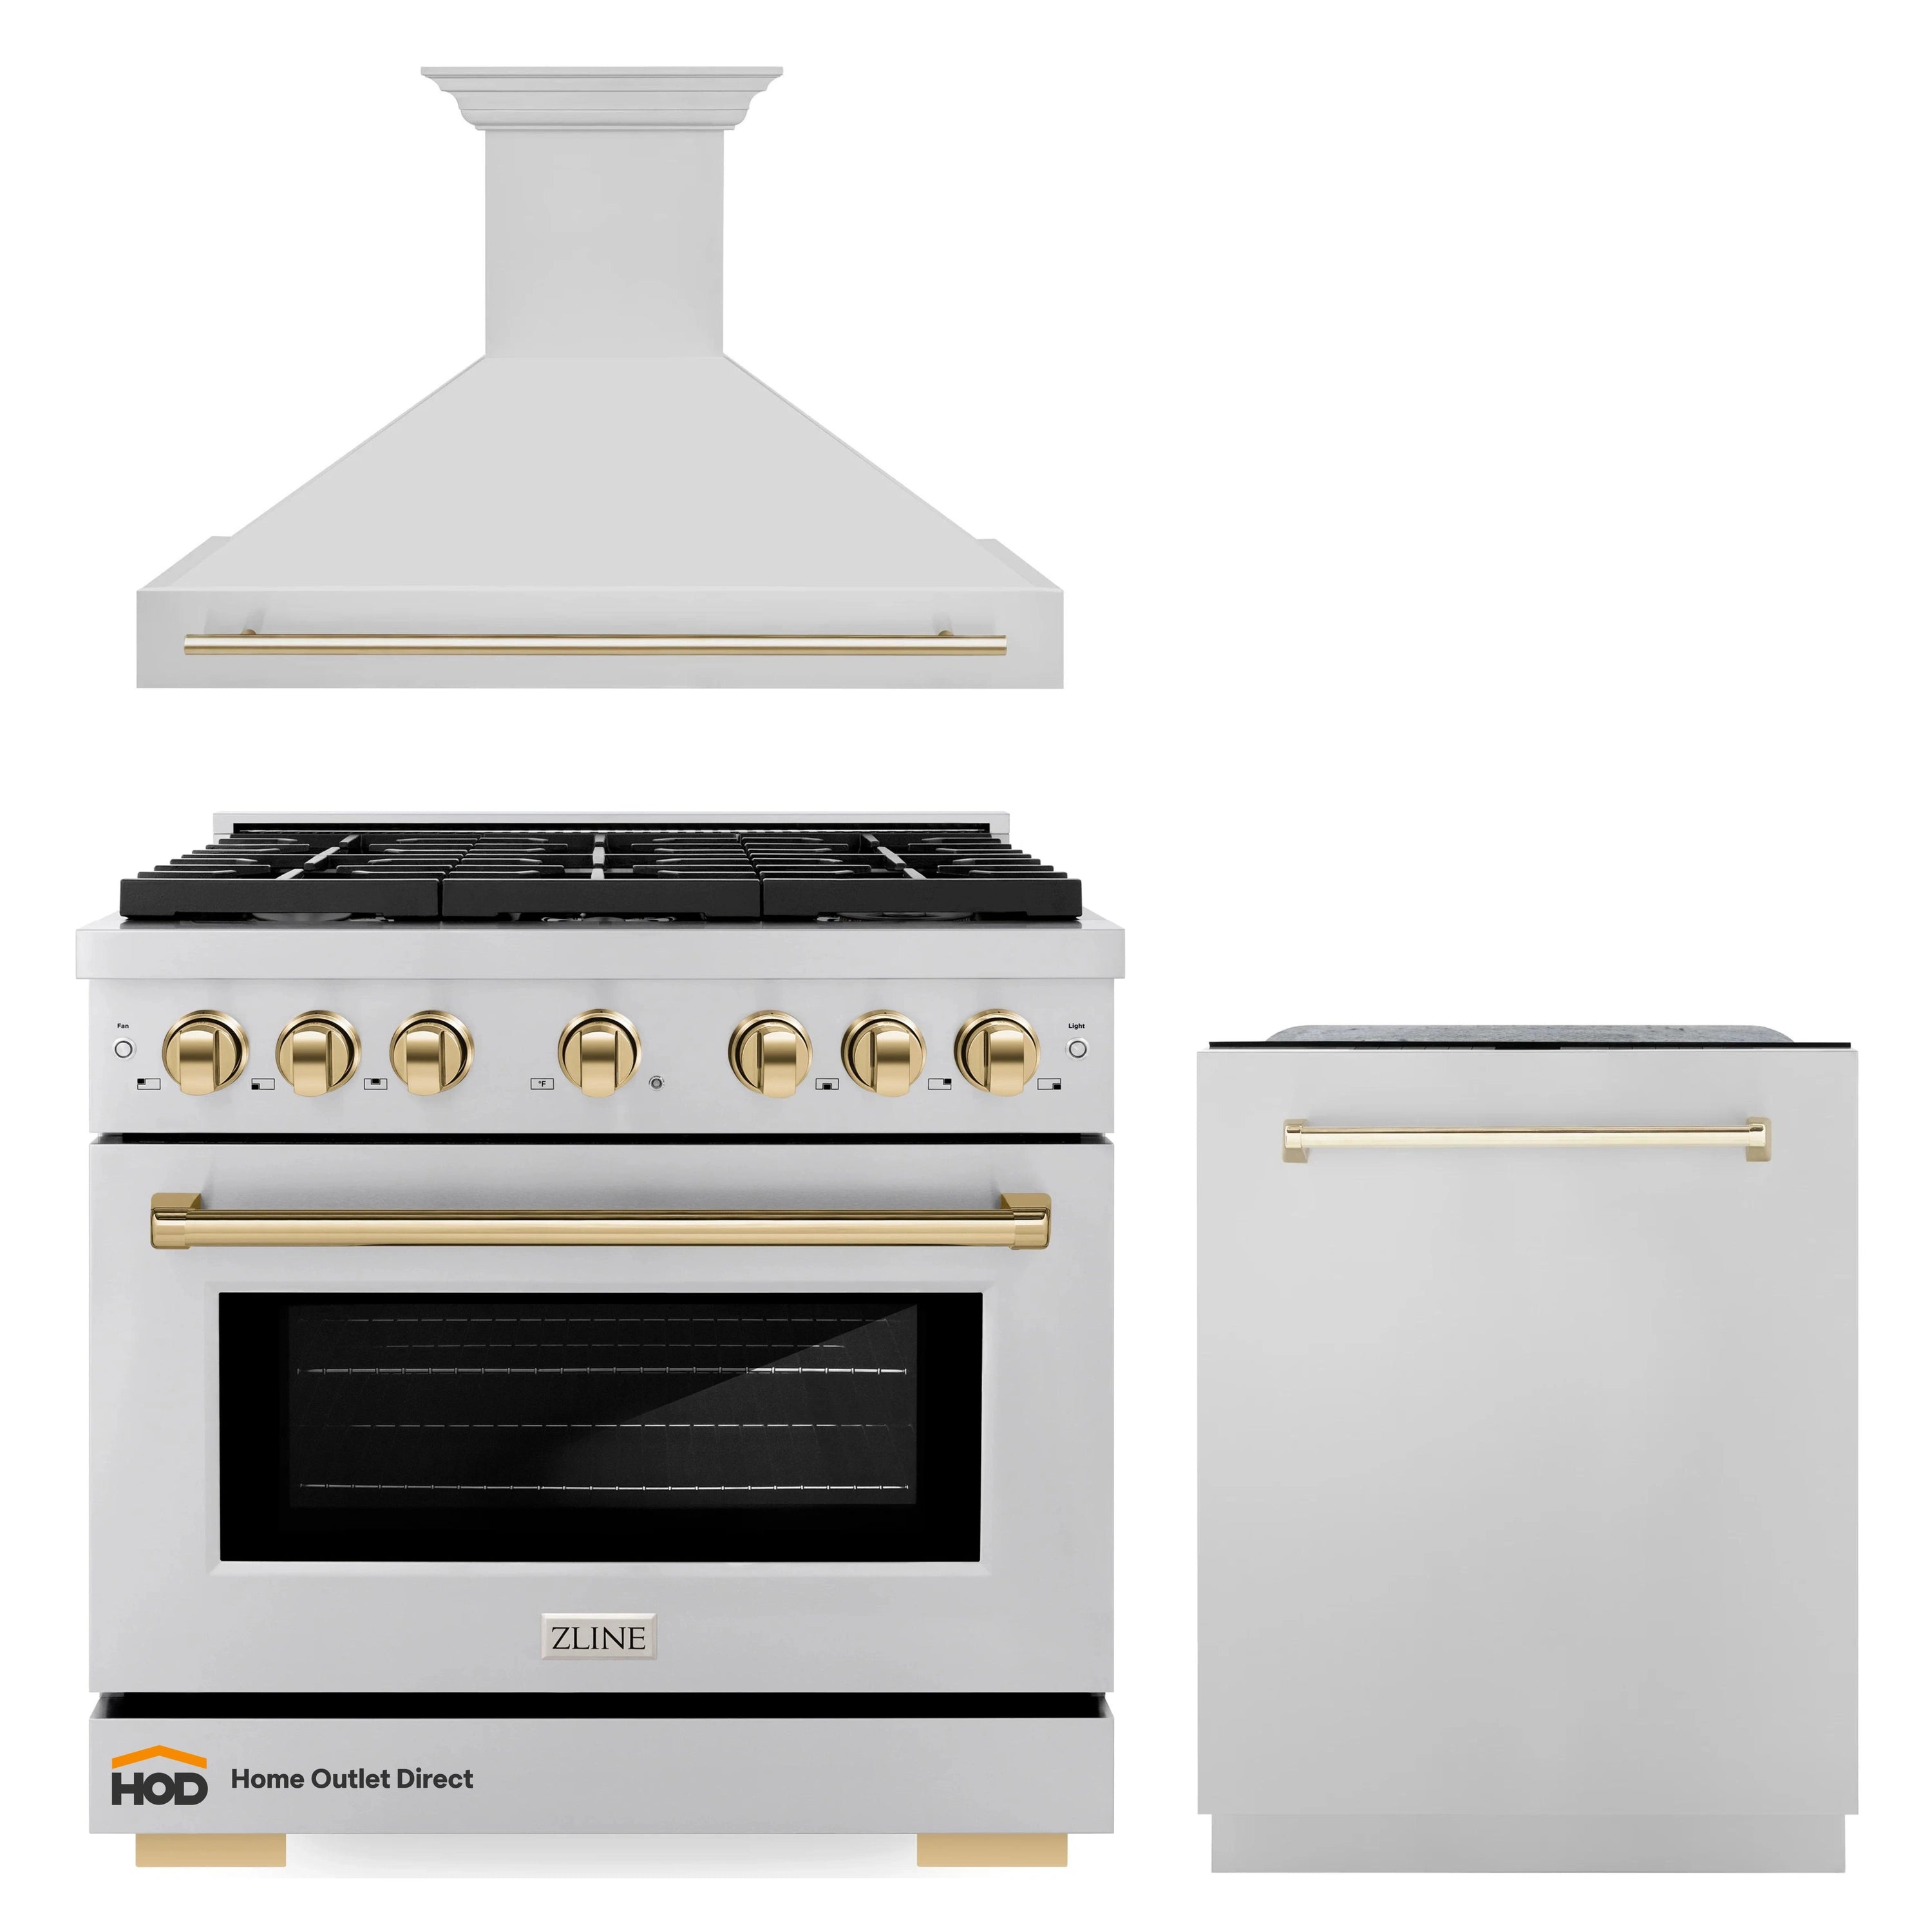 ZLINE Autograph Edition 3-Piece Appliance Package - 36-Inch Gas Range, Wall Mounted Range Hood, & 24-Inch Tall Tub Dishwasher in Stainless Steel with Gold Trim (3AKP-RGRHDWM36-G)